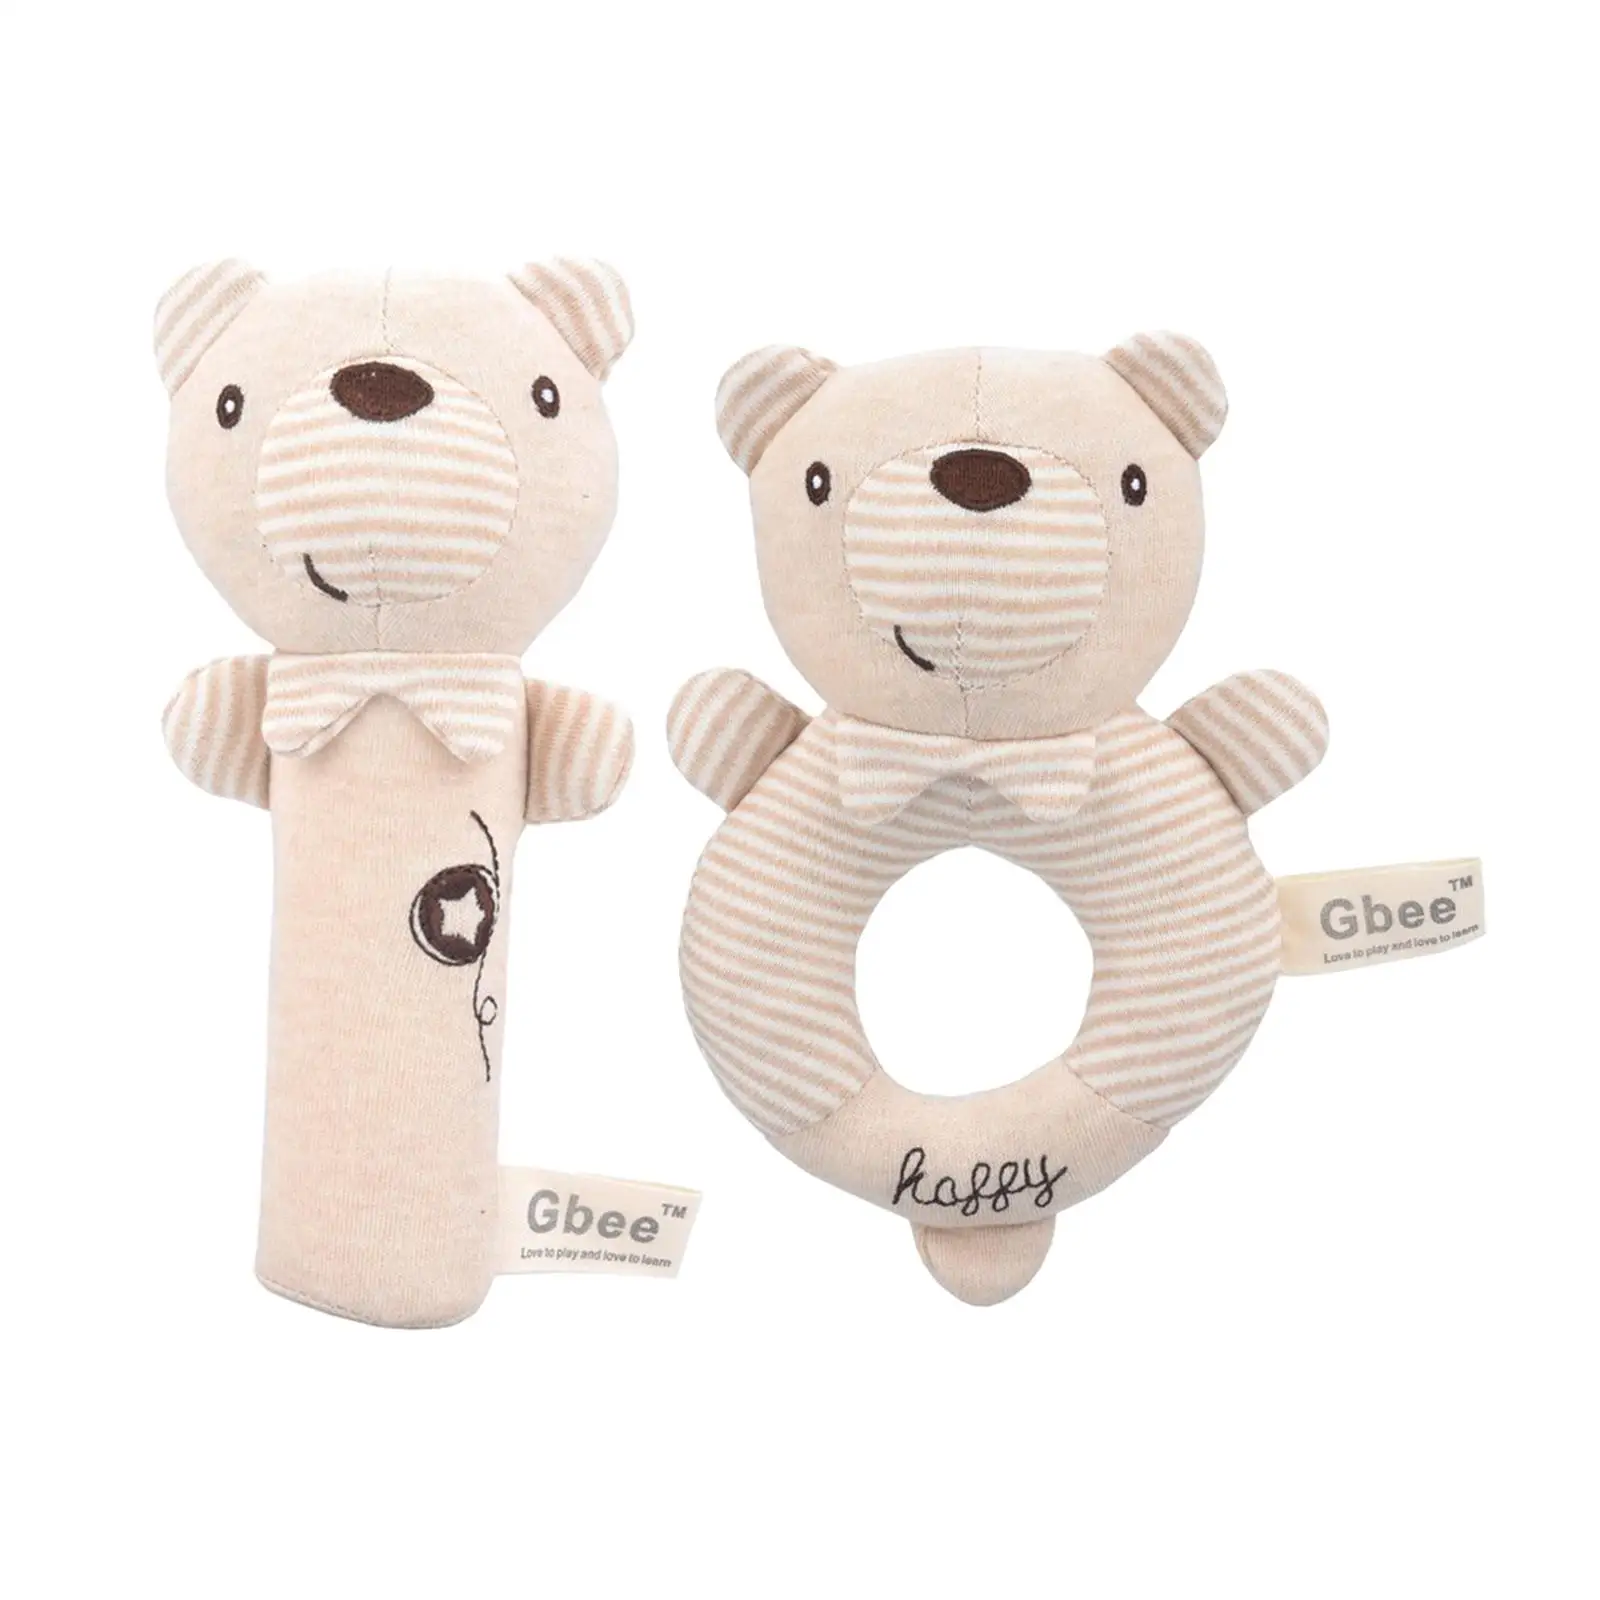 2 Pieces Animal-Shaped Infant Rattles Shaker handheld grip Toys Handheld Rattles Squeakers Stuffed for   Newborn